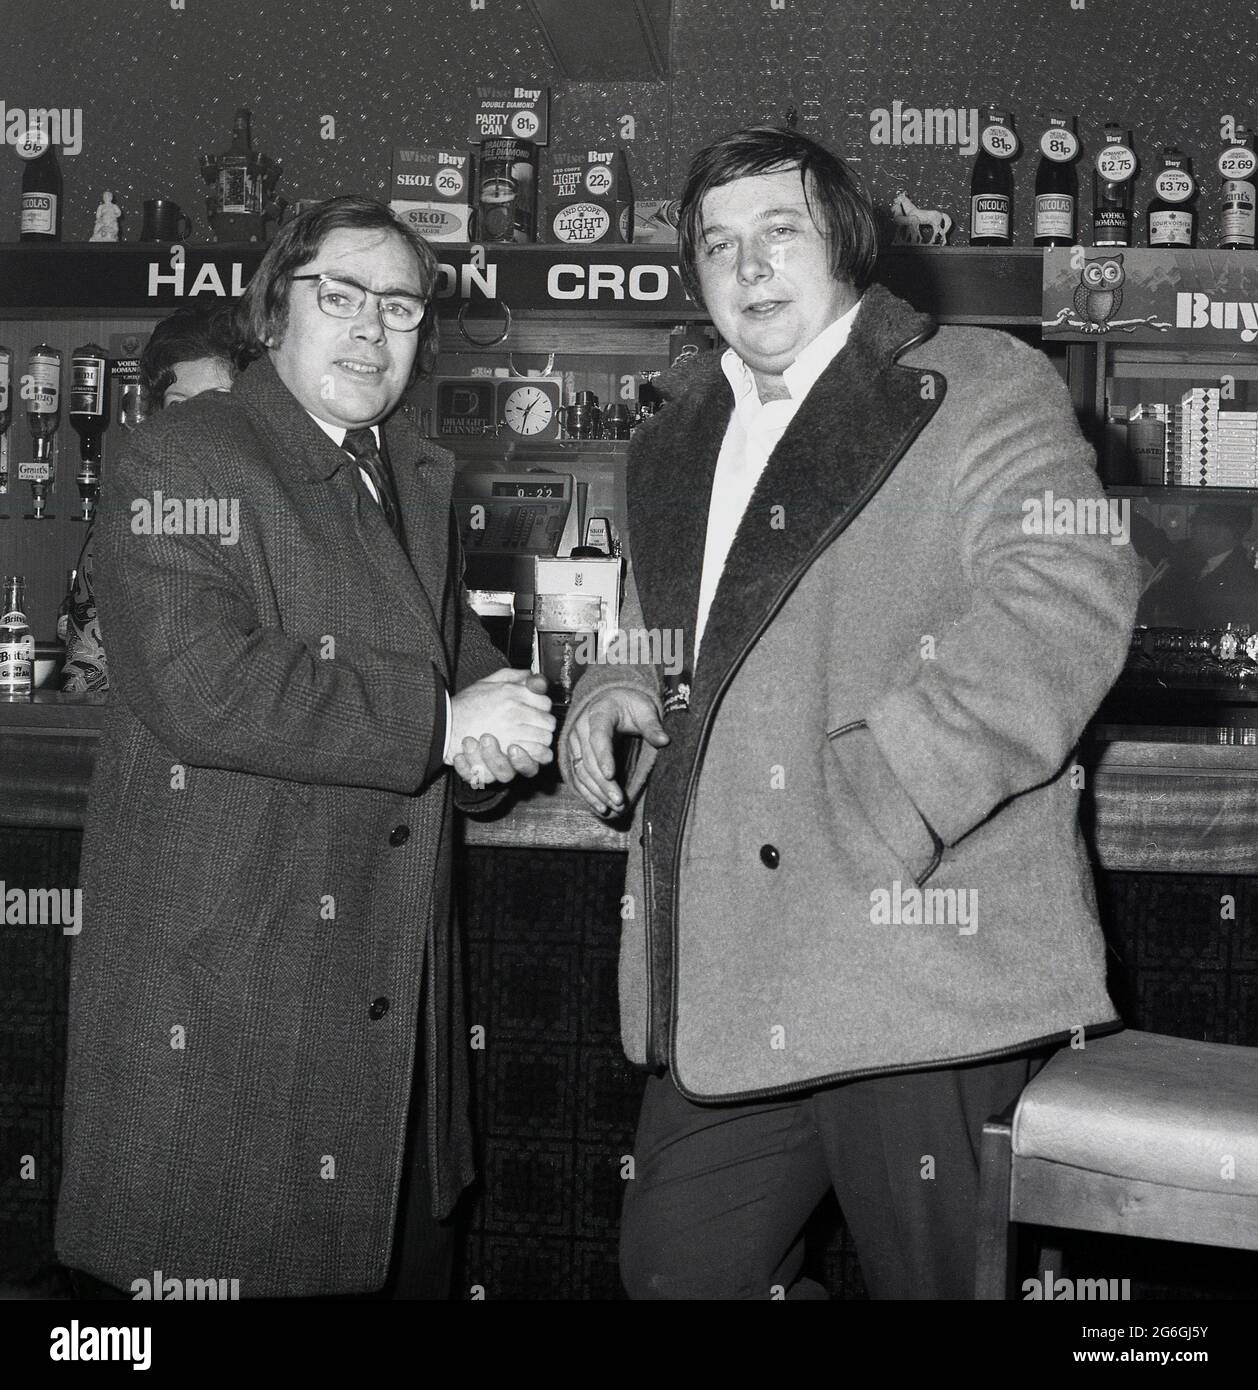 1970s, historical, two second hand car dealers in their coats, standing together in a bar having a lunchtime drink, Croydon, England, UK. Classic drinks of the day can be seen; Ind Coope Light Ale, Skol Lager and a party can of Double Diamond for 81 pence! Stock Photo